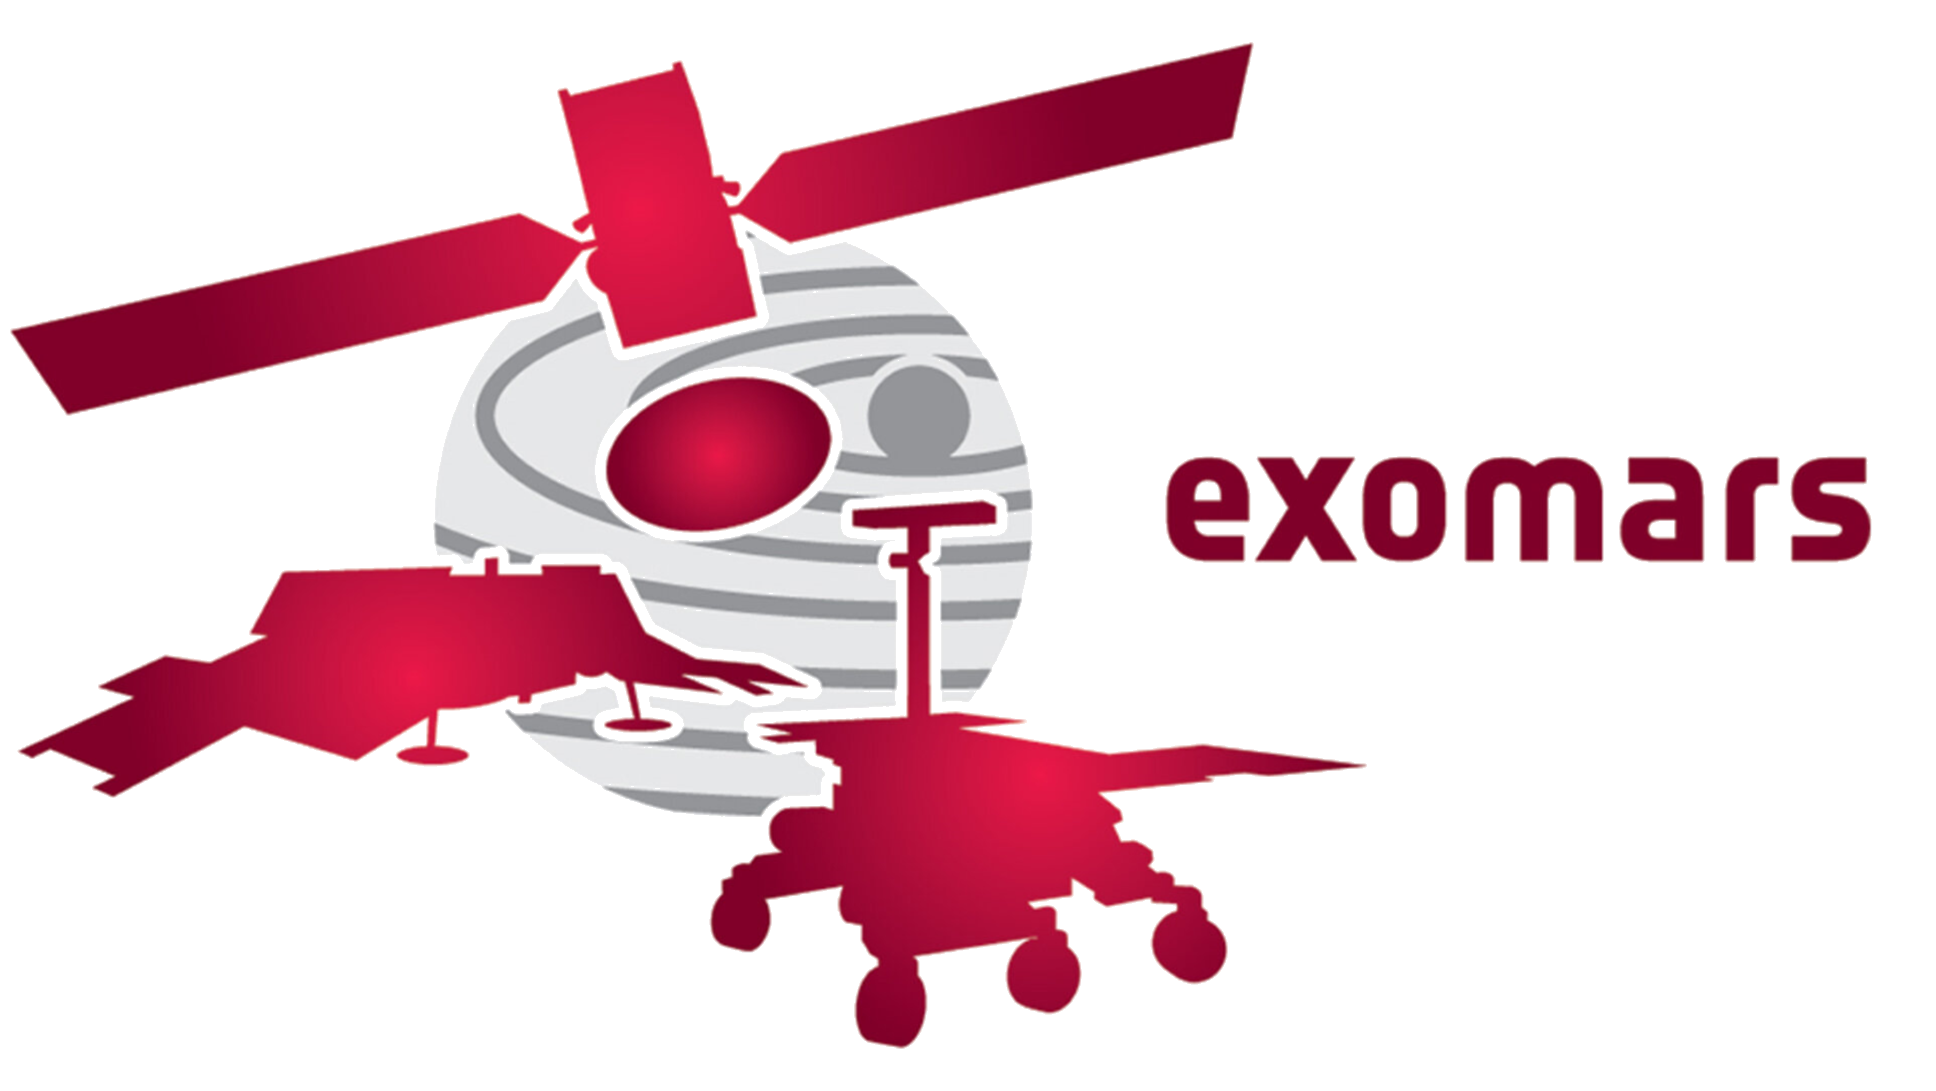 ExoMars/MOMA logo; A satellite probe, a rover, and other machines silhouetted in red and outlined details in white, red text says 'exomars'